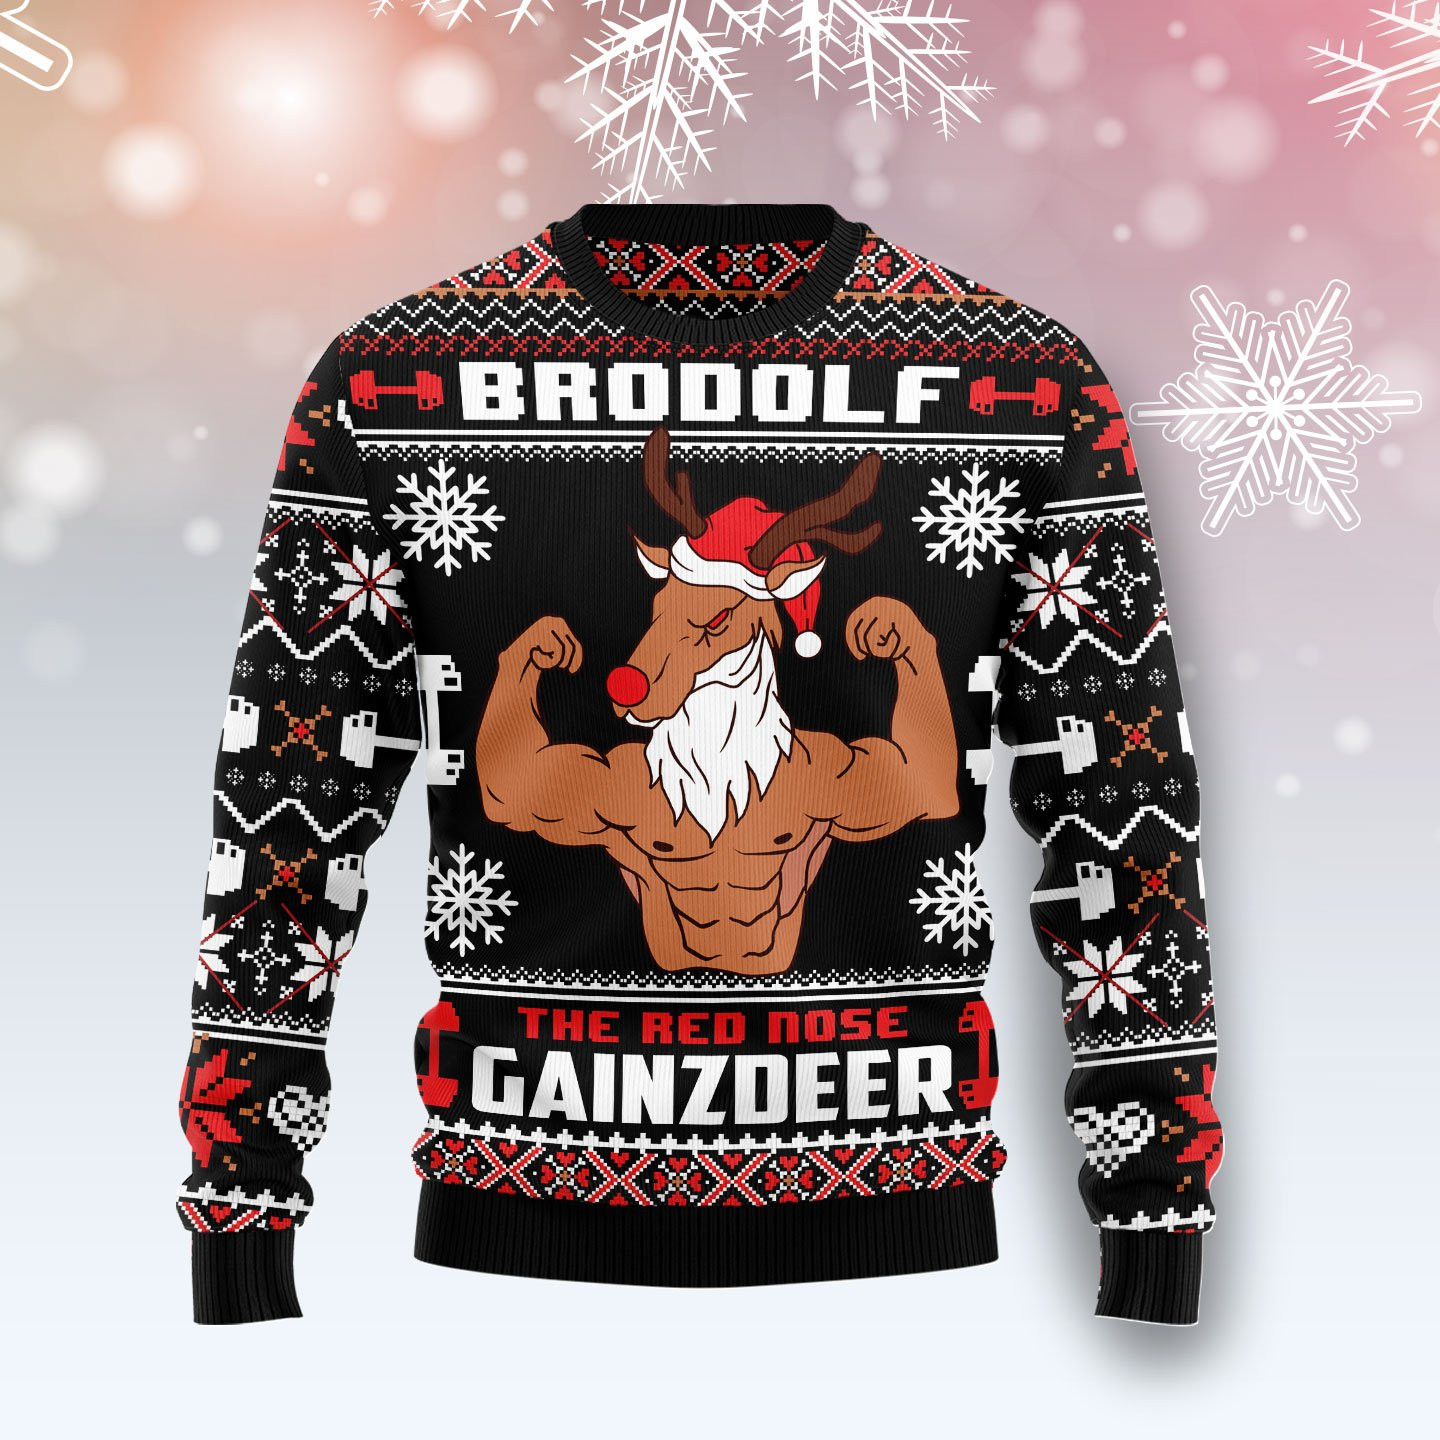 Brodolf The Red Nose Gainzdeer Gym Ugly Sweater